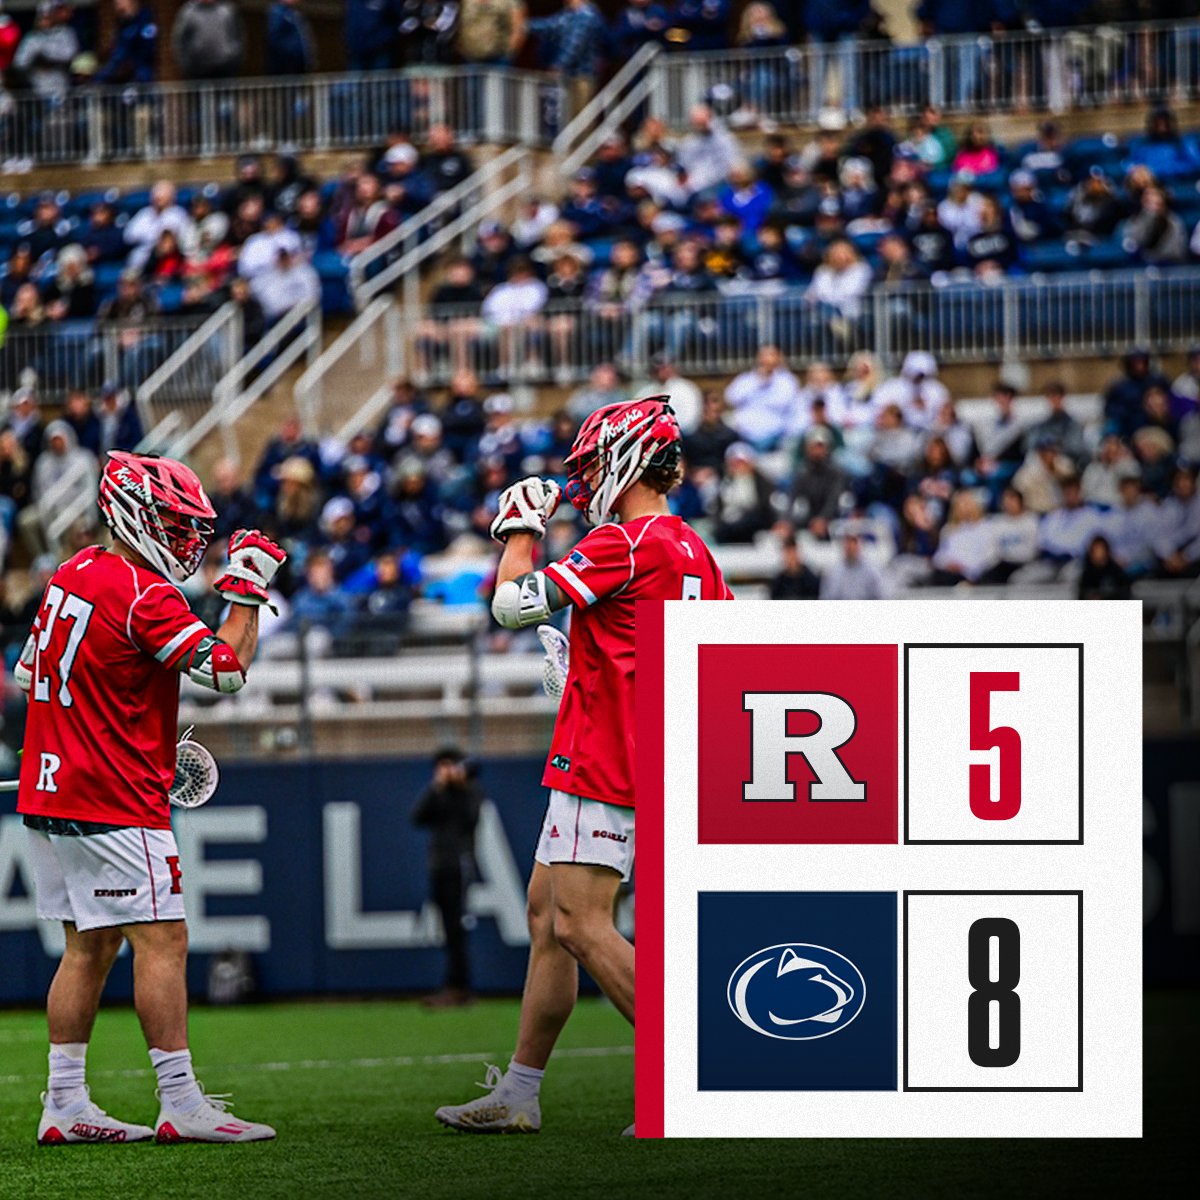 HALFTIME: Penn State leads #RUMLax 8-5 in the Big Ten Tournament Quarterfinals Goals from Kurdyla (2), Sidorski, Peters and Kulas Cardin Stoller with 8 saves